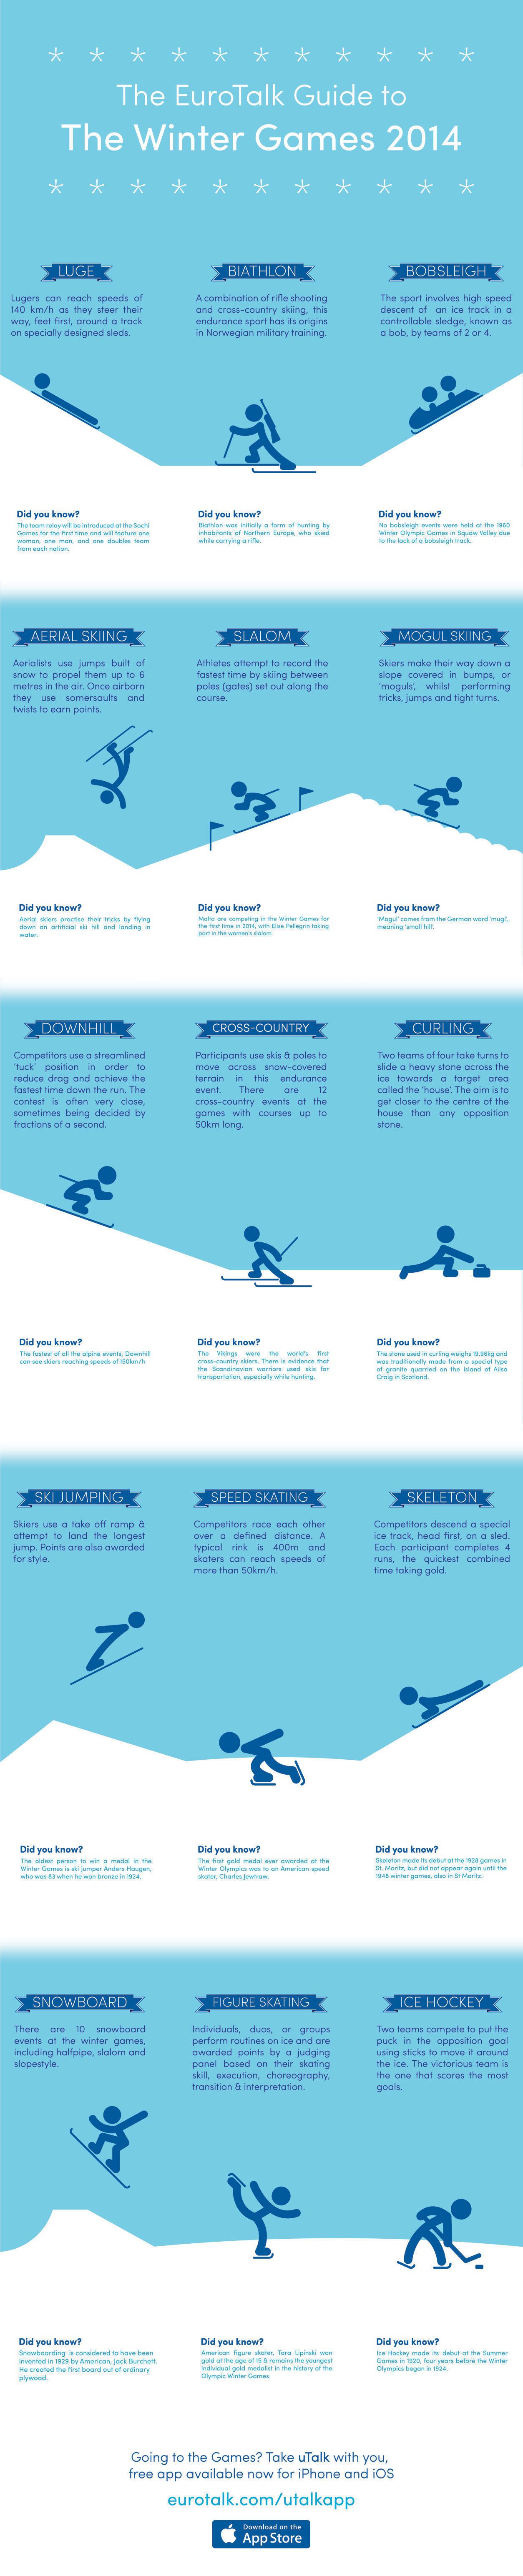 The EuroTalk Guide to the Winter Olympics